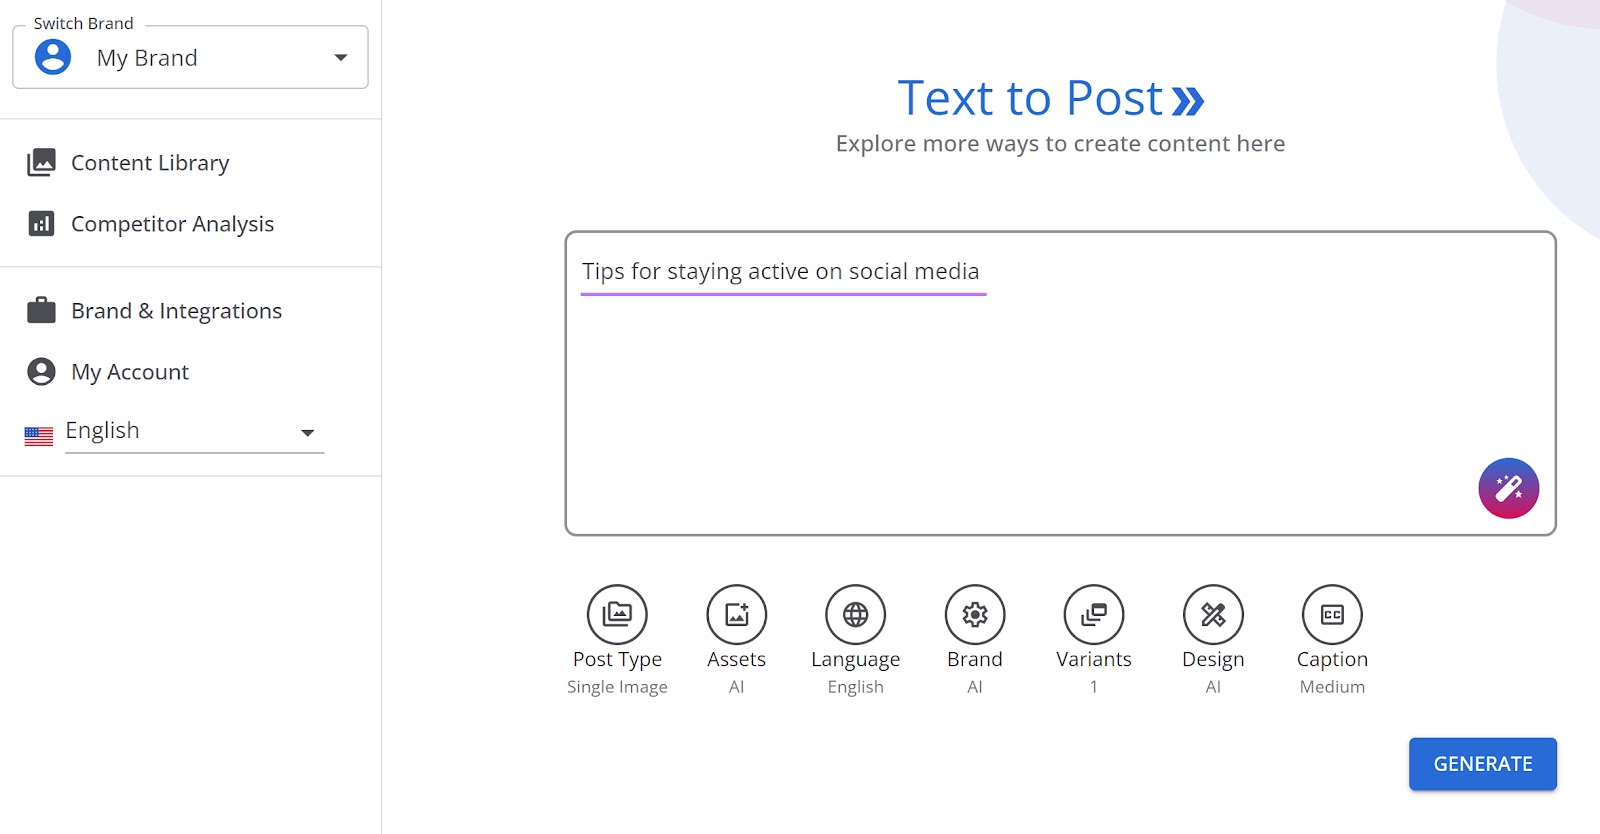 AI Social Content Generator "Text to post" section with "Tips for staying active on social media" in the text field.